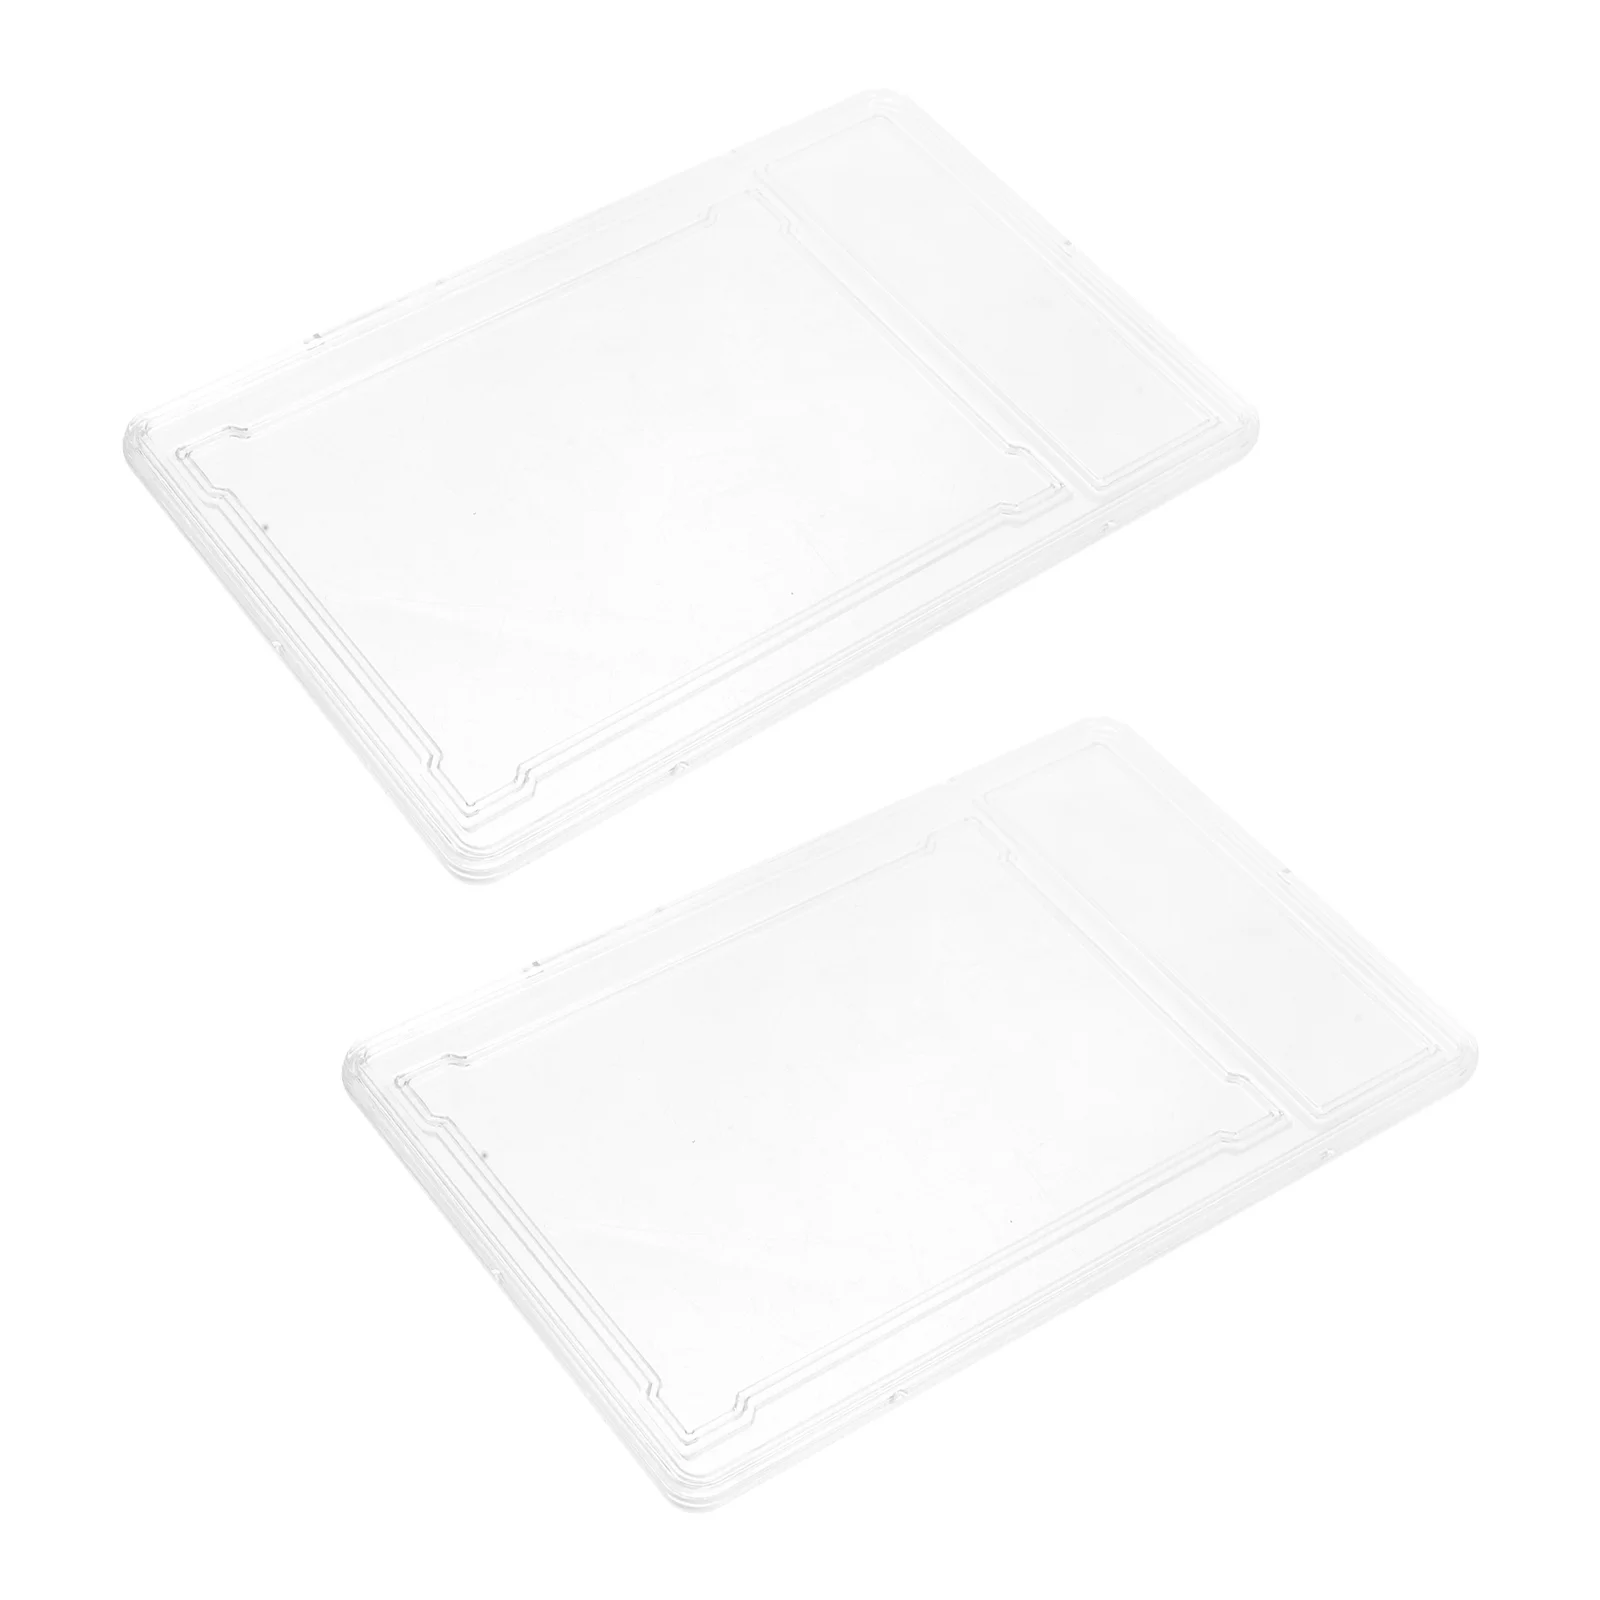 

2 Pcs Brick Box Game Trading Cards Cases Clear Baseball Holders Hard Protectors Sleeves Clip